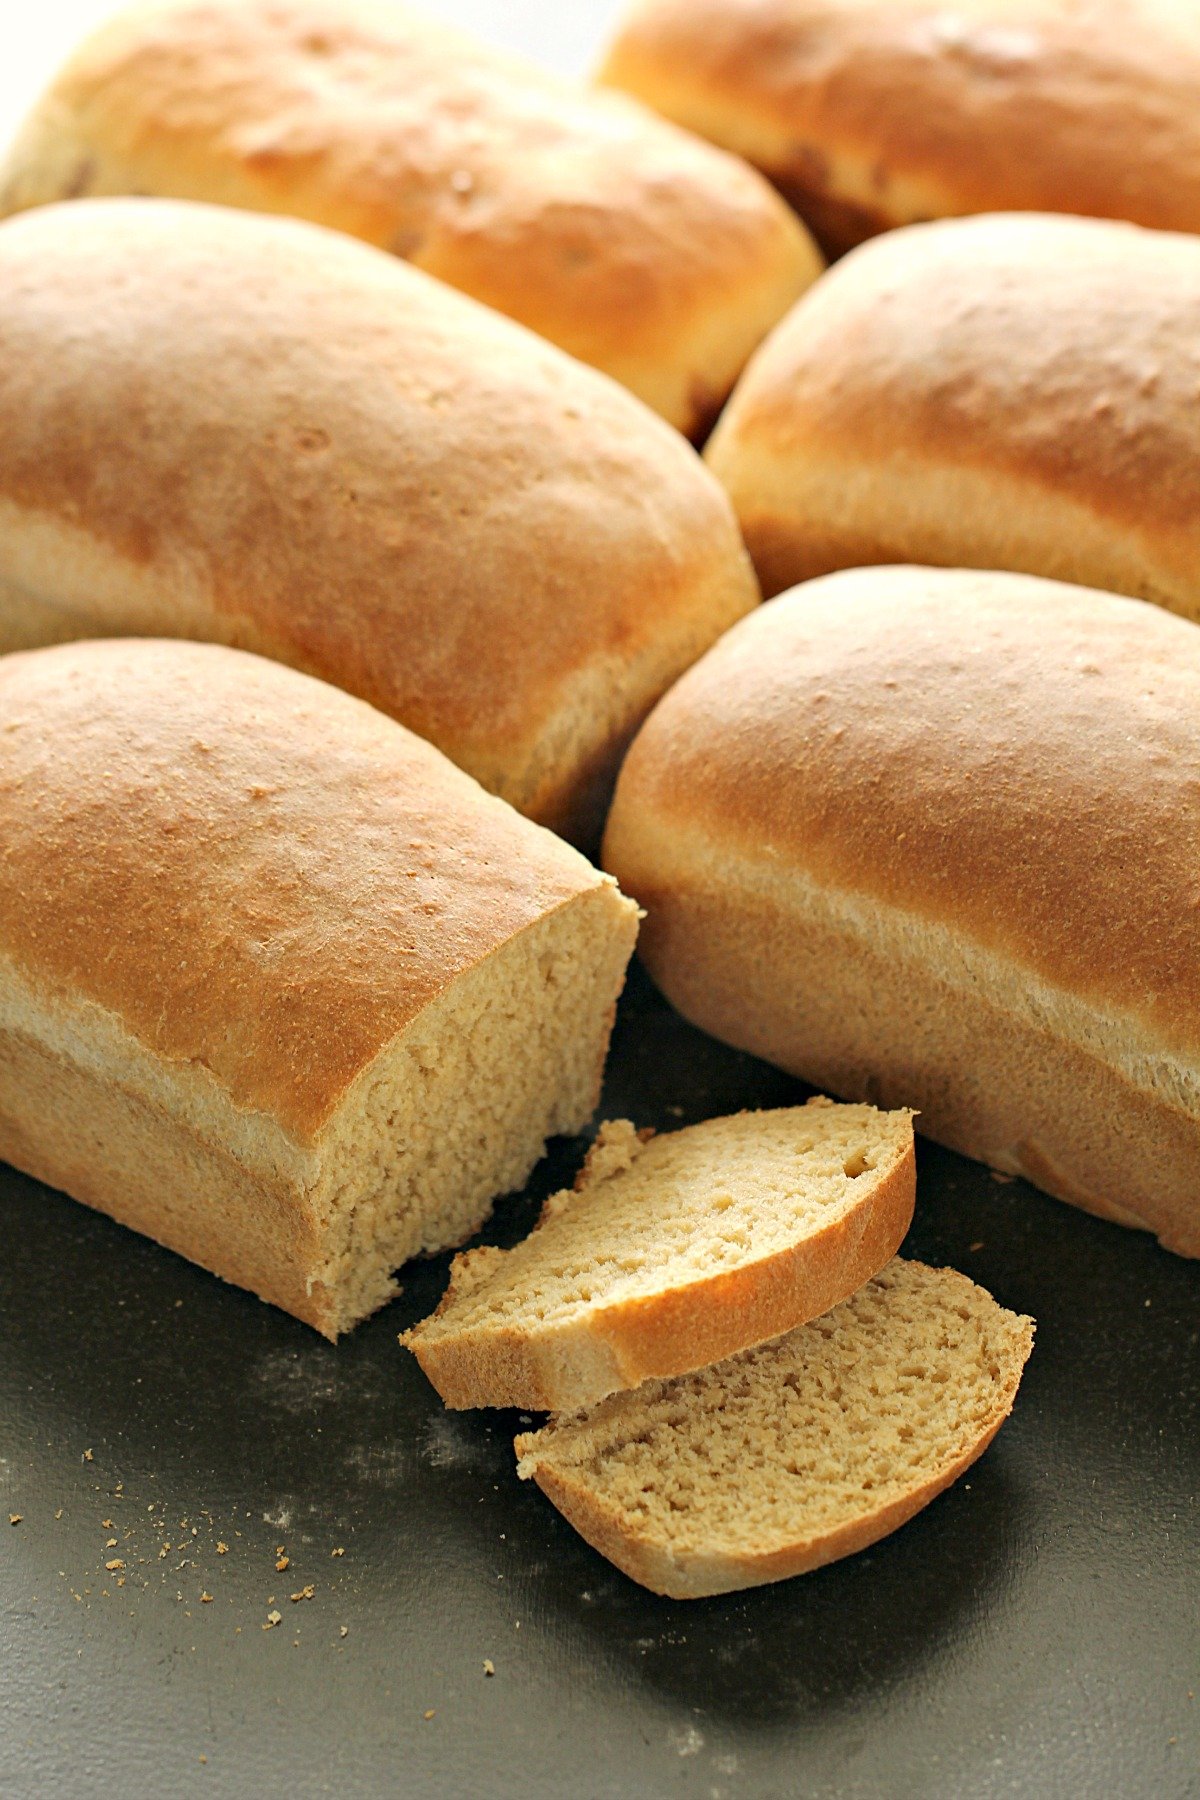 Make 6 Loaves of Whole Wheat Bread in ONE hour!